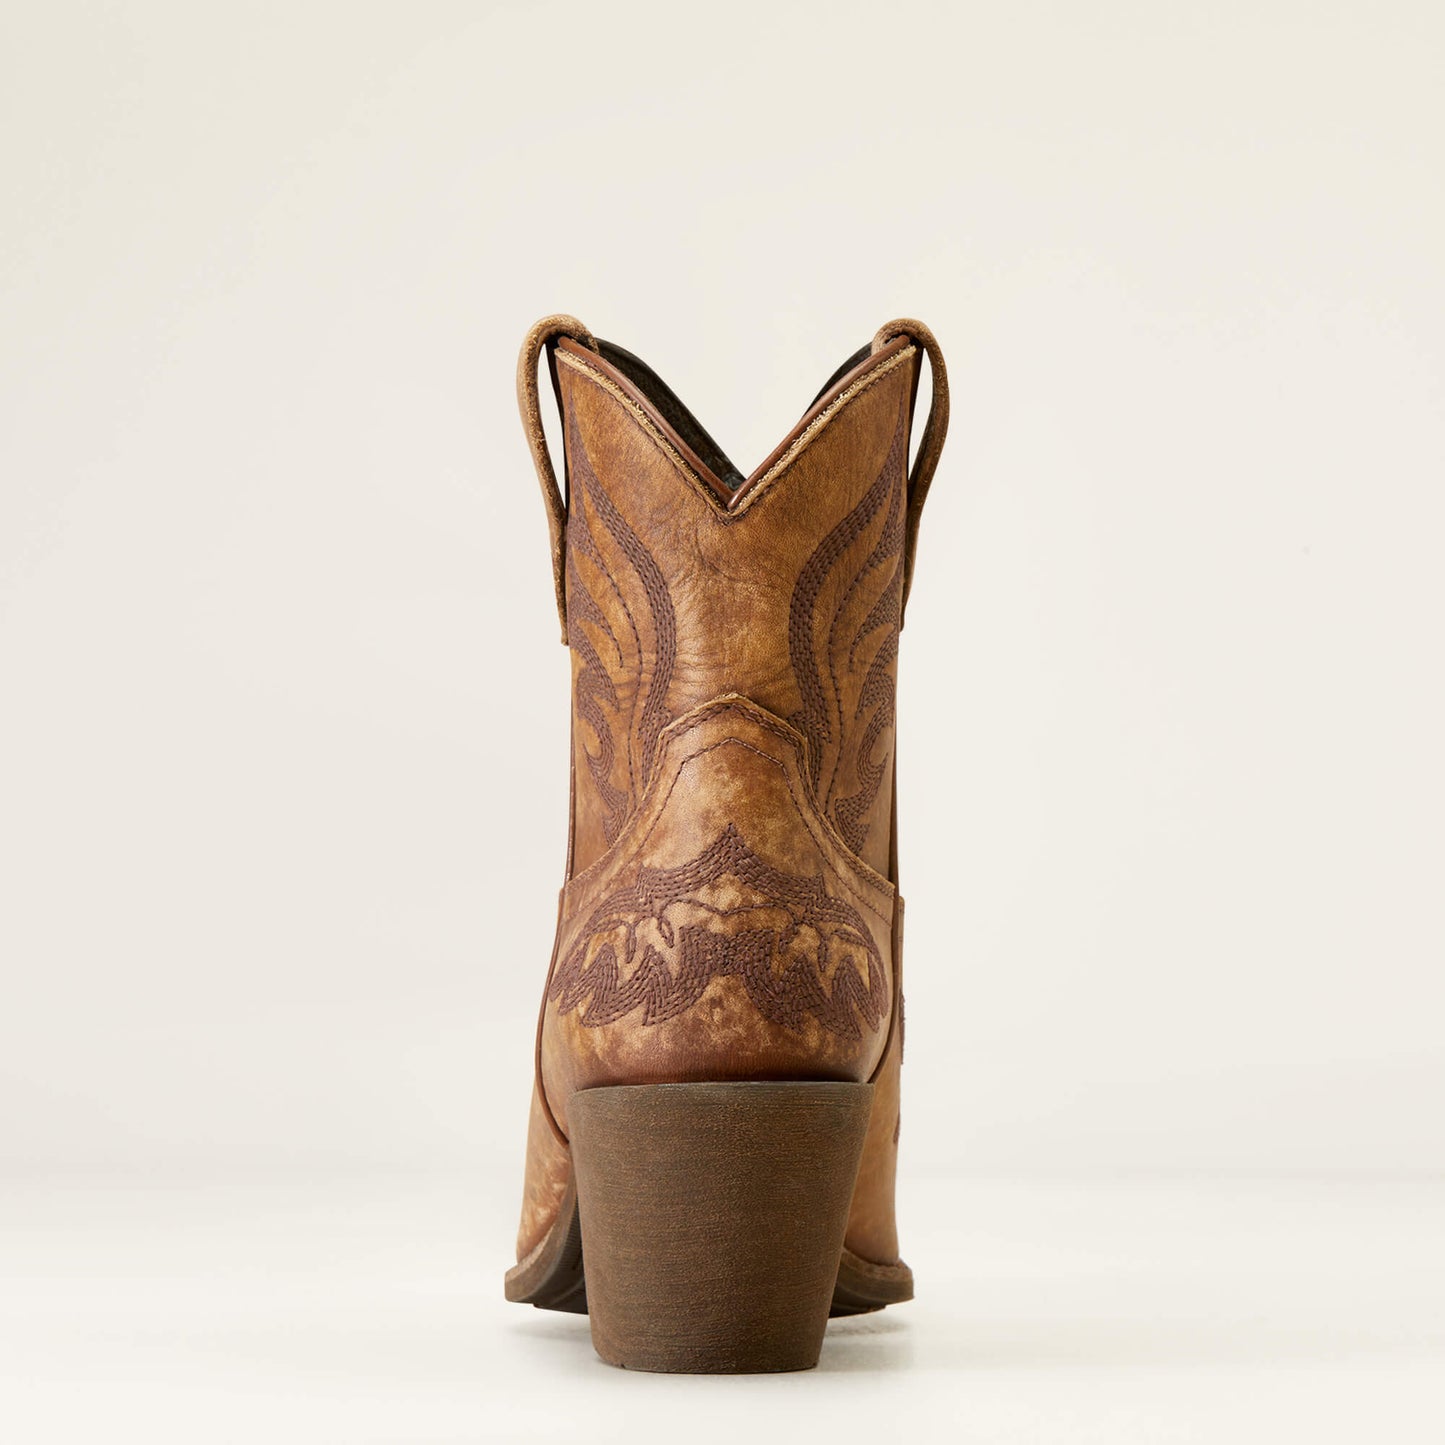 The Ariat Chandler Western Boot - Naturally Distressed Brown